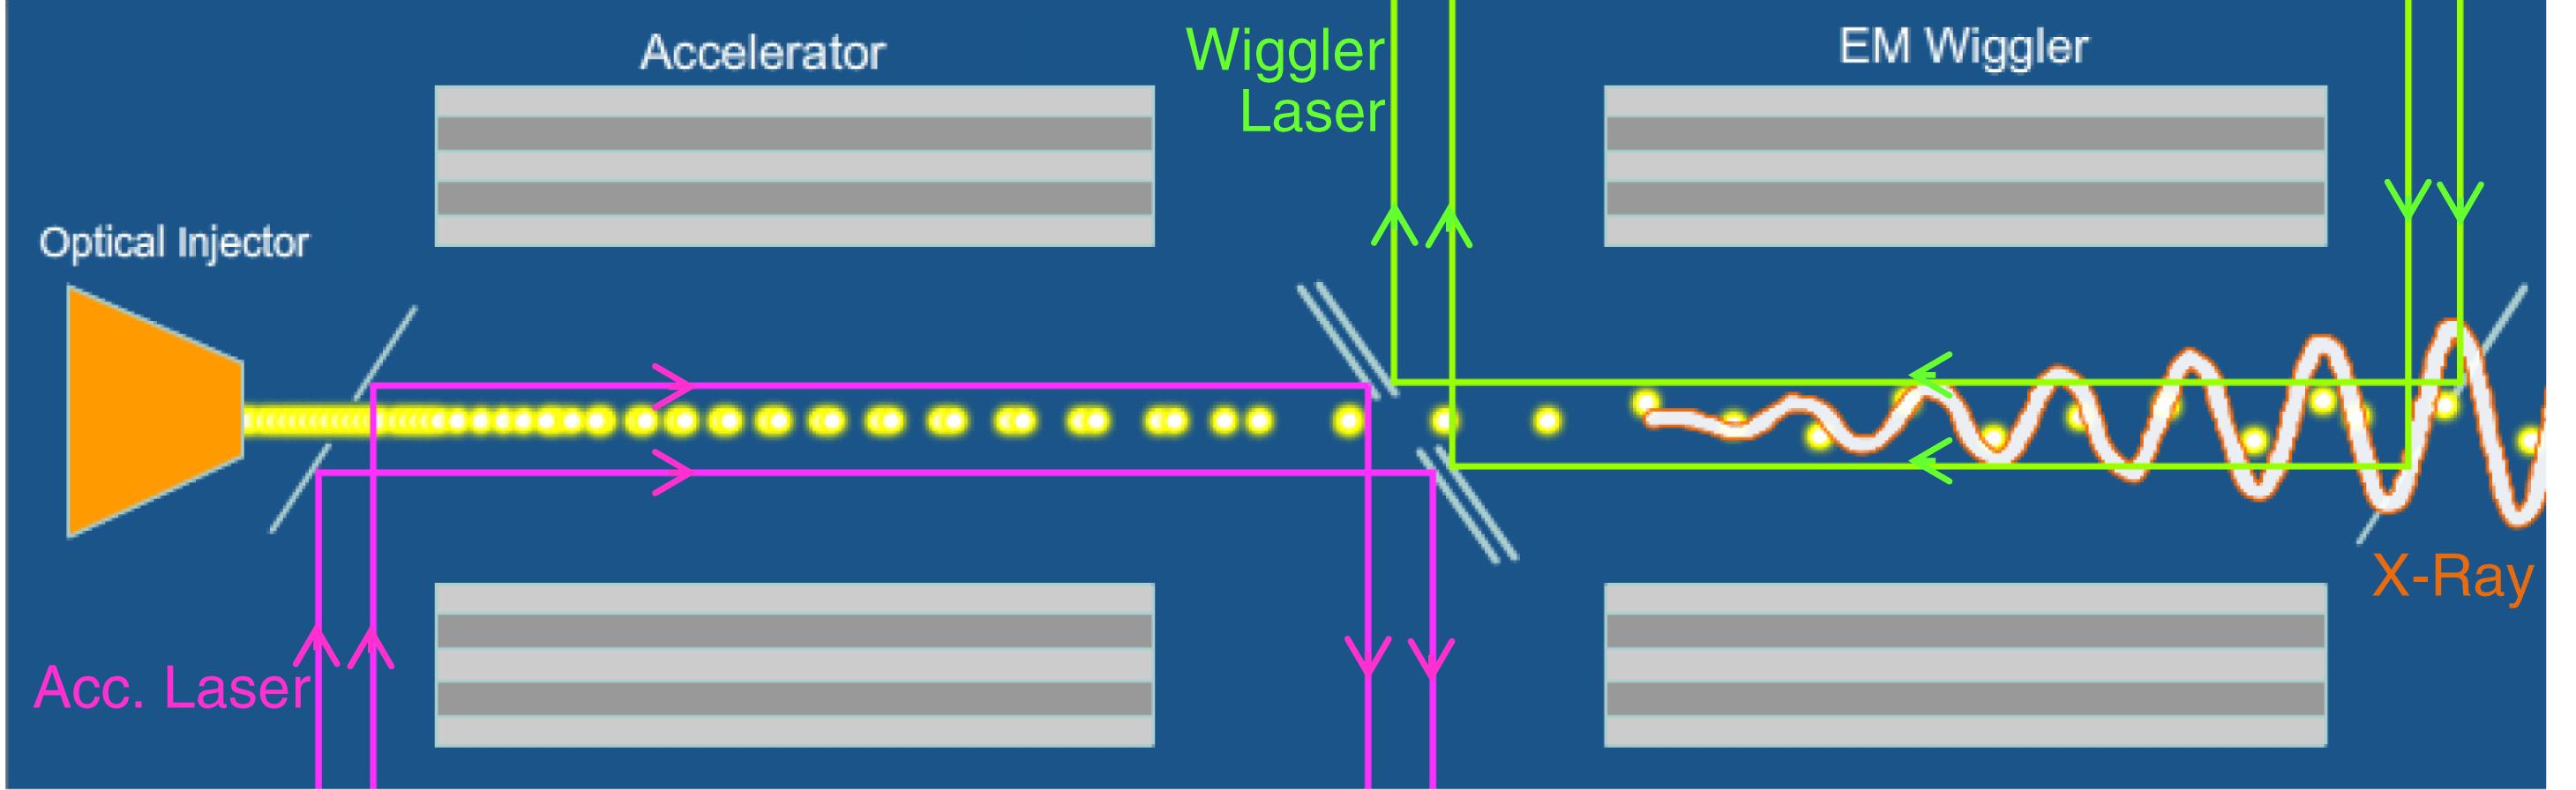 Schematic of an all-Bragg system. On the left, the Bragg accelerator supports a co-propagating mode which accelerates the e-beam. The latter is injected into another Bragg structure which supports a TEM mode (inside the vacuum core) counter-propagating to the electrons, which as a result generates X-ray radiation.